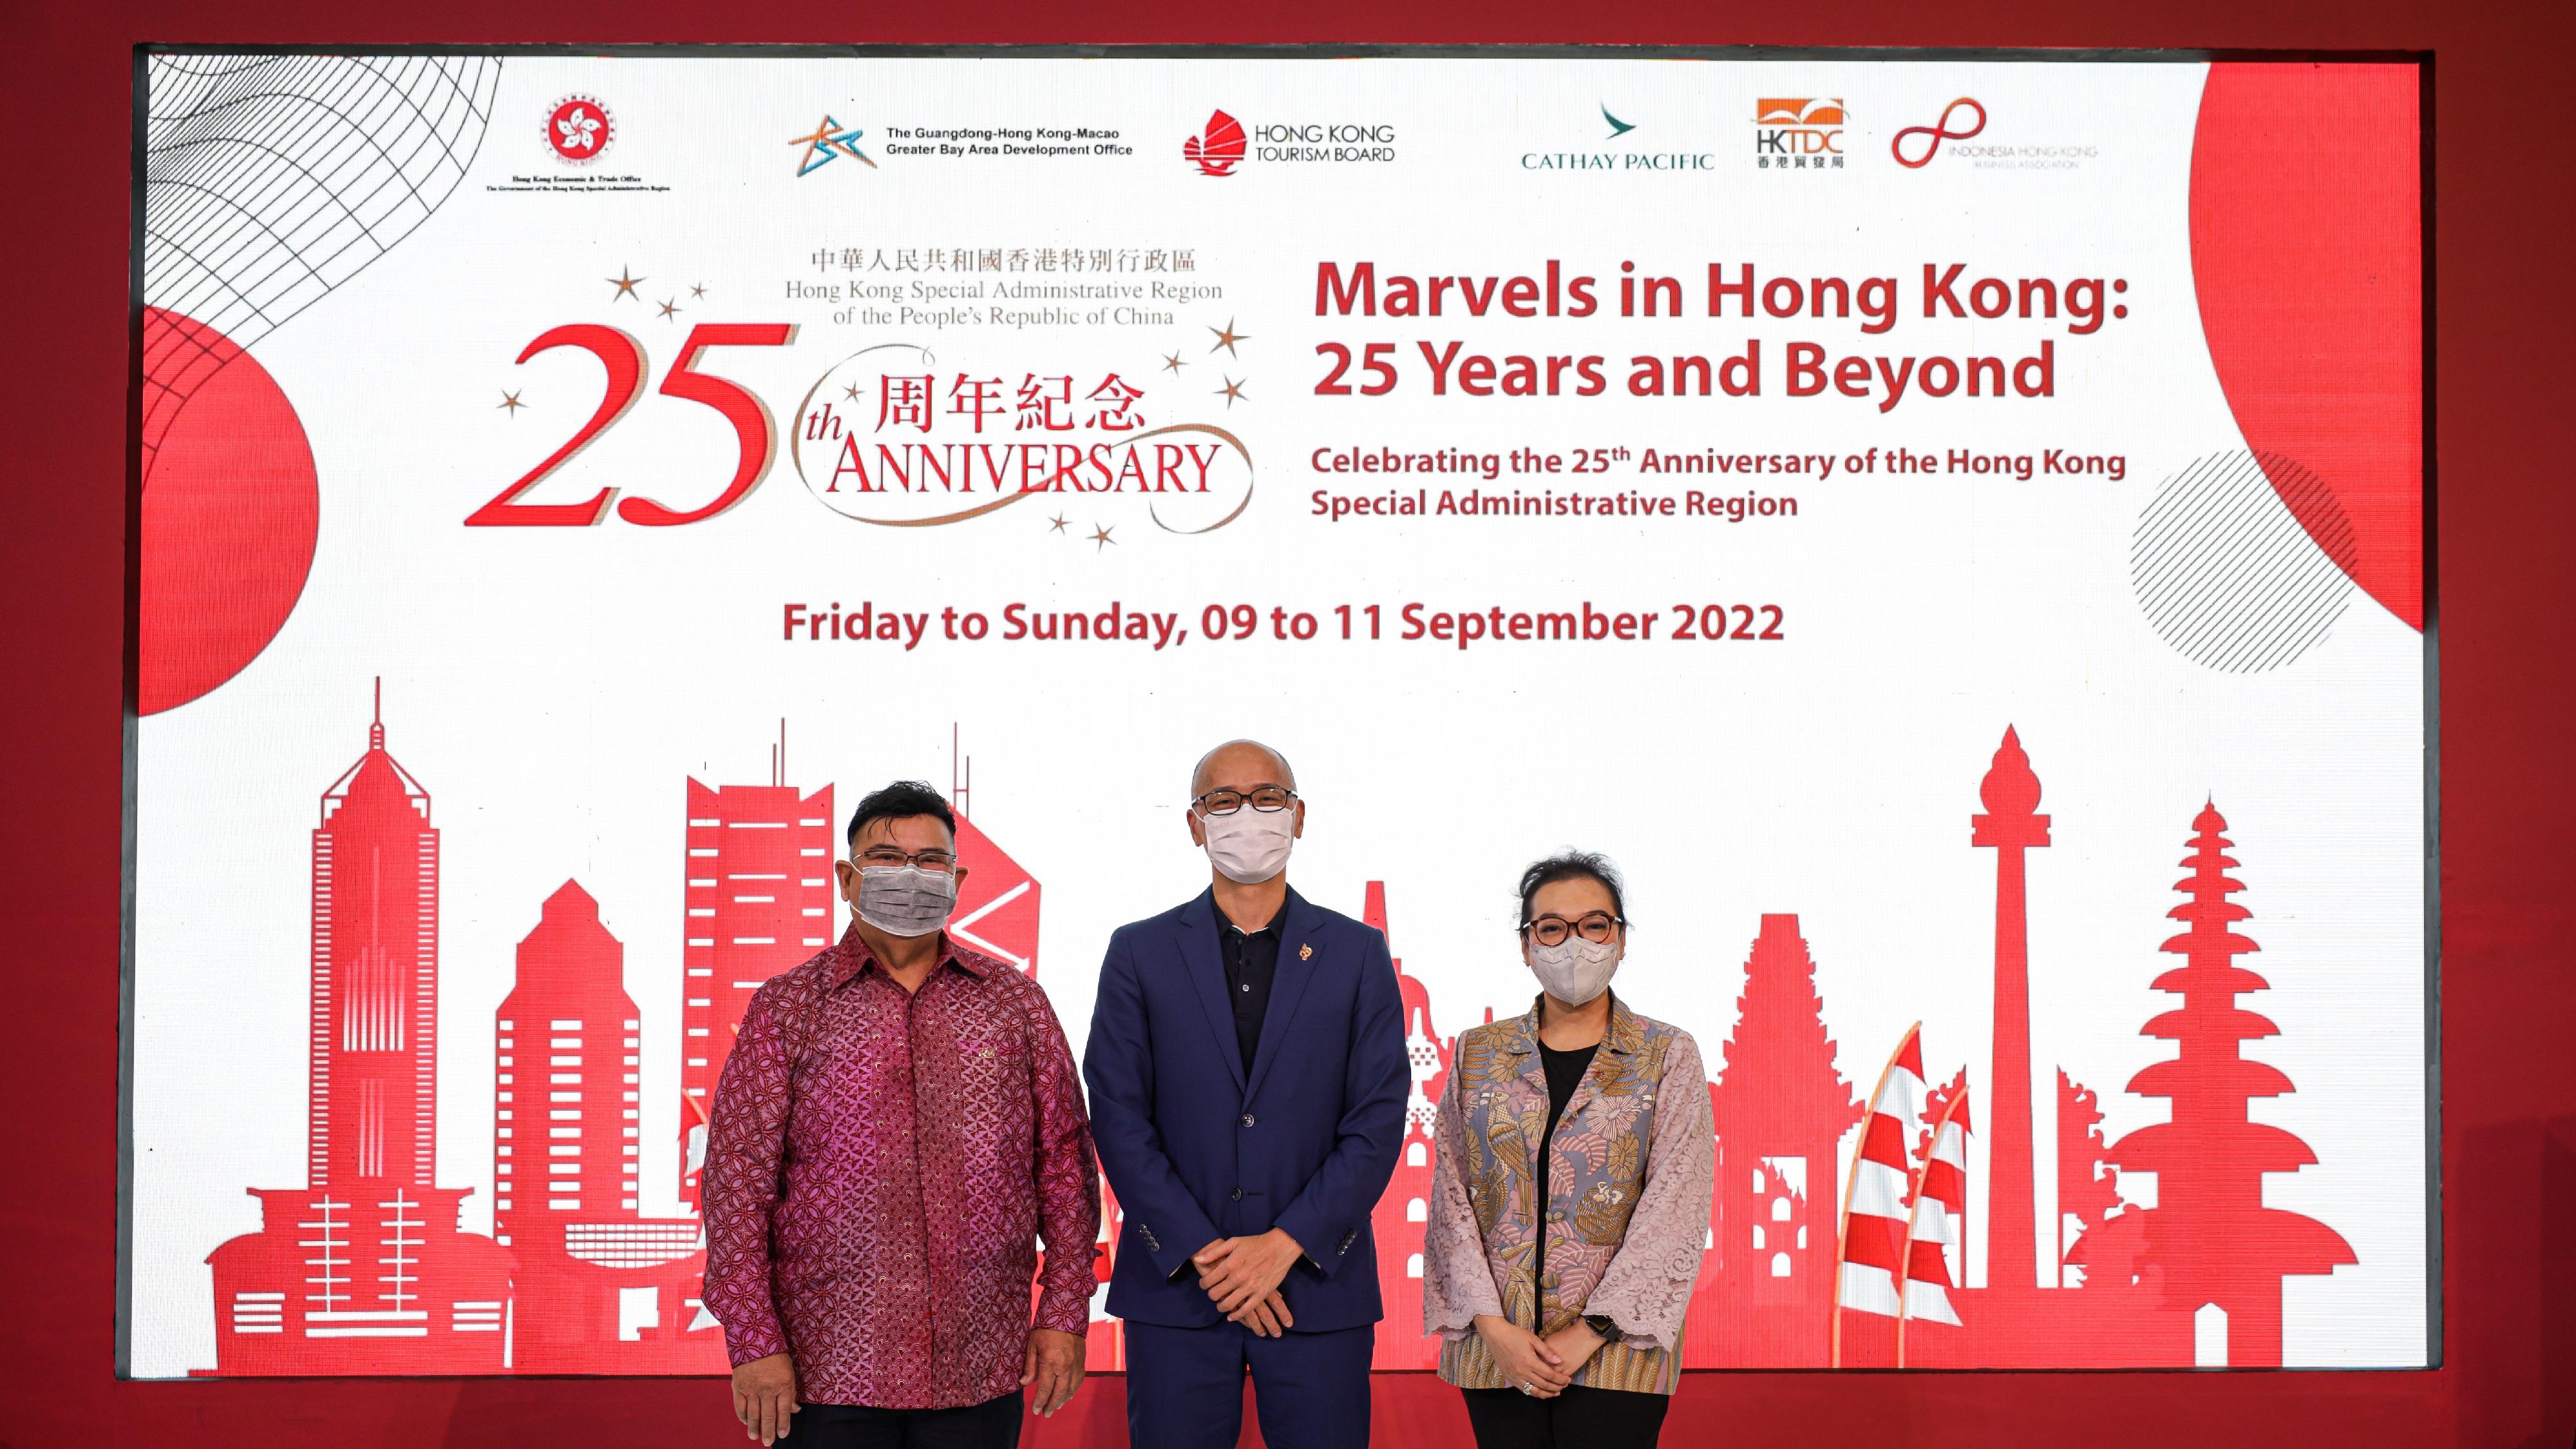 The Hong Kong Economic and Trade Office, Jakarta (HKETO Jakarta) today (September 9) hosted the opening ceremony of the "Marvels in Hong Kong: 25 Years and Beyond" roving exhibition in Jakarta, Indonesia, to celebrate the 25th anniversary of the establishment of the Hong Kong Special Administrative Region. Photo shows (from left) the Chairman of the Indonesia Hong Kong Business Association, Mr James Budiono; the Director-General of HKETO Jakarta, Mr Law Kin-wai; and the Officer-in-charge of Indonesia of the Hong Kong Trade Development Council, Ms Rachel Kurniawan, officiating at the launch ceremony of the exhibition.